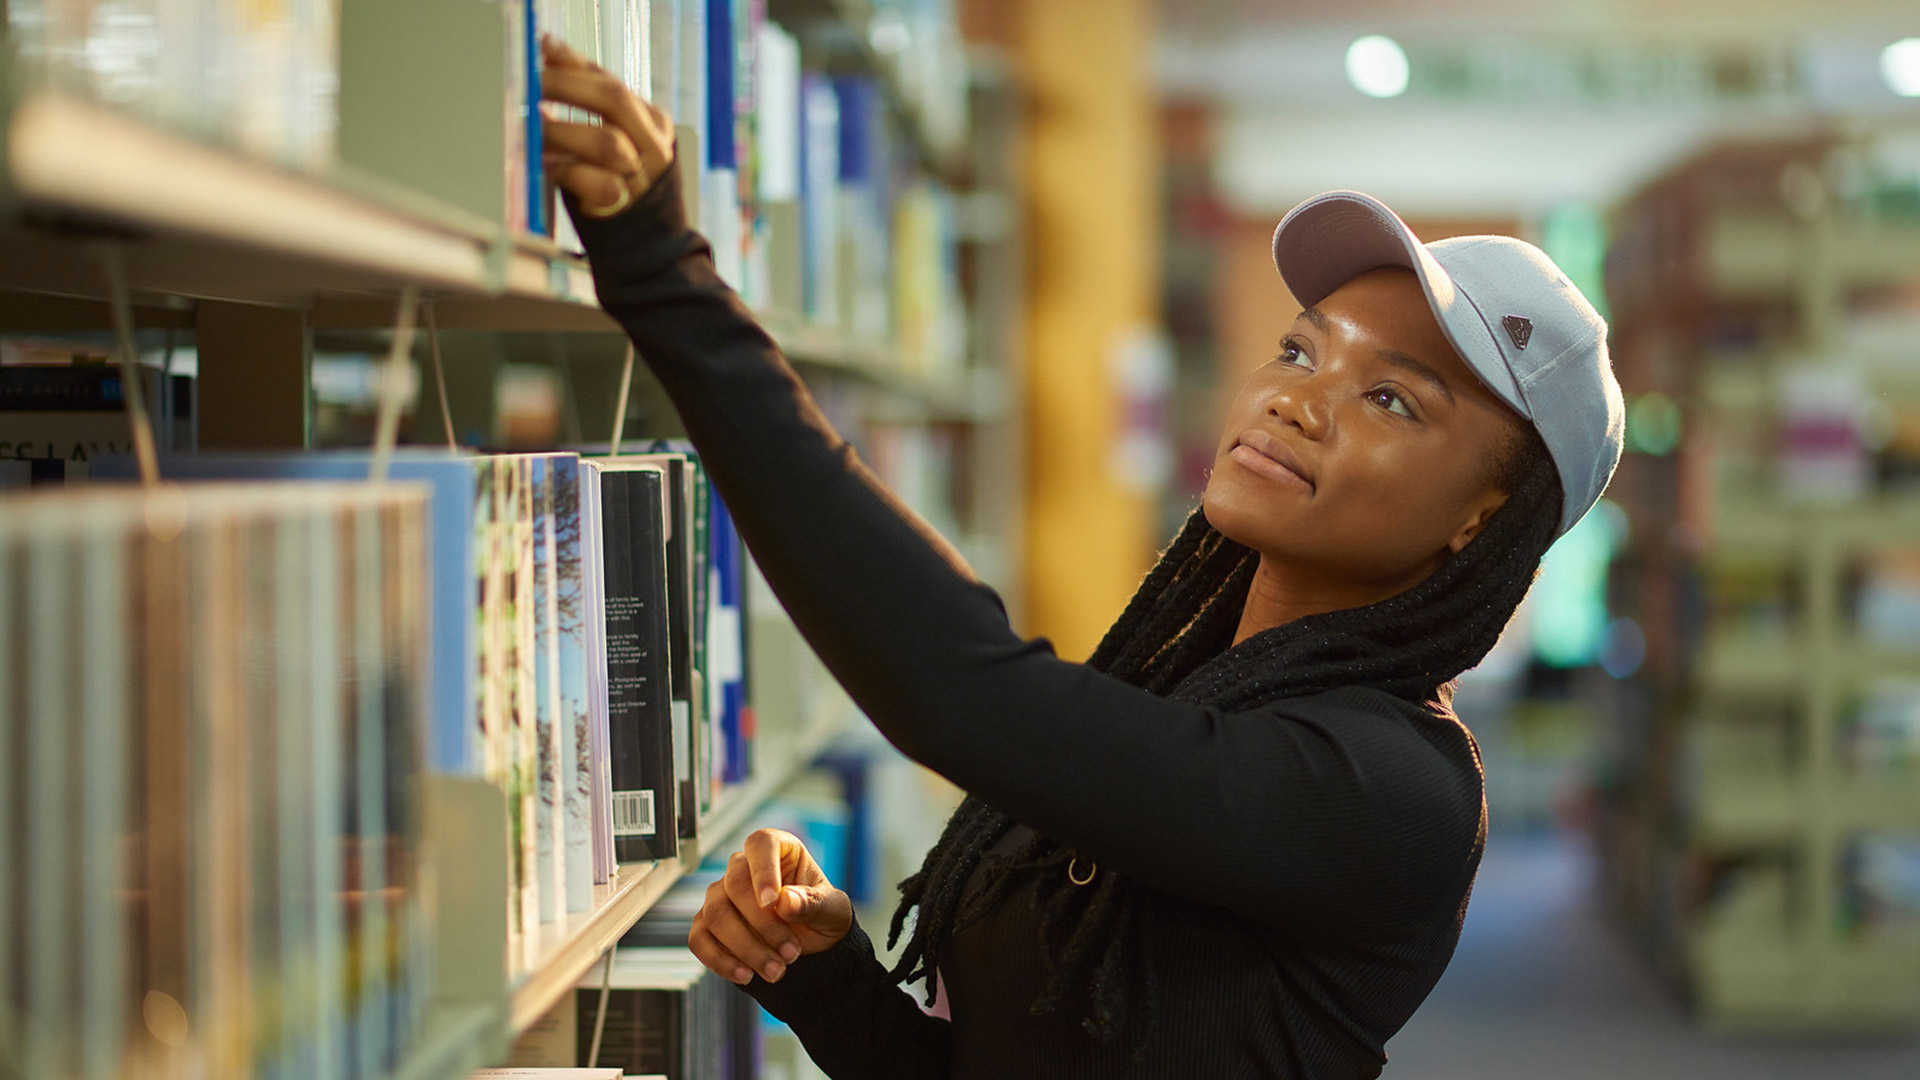 A student selecting a book in the library